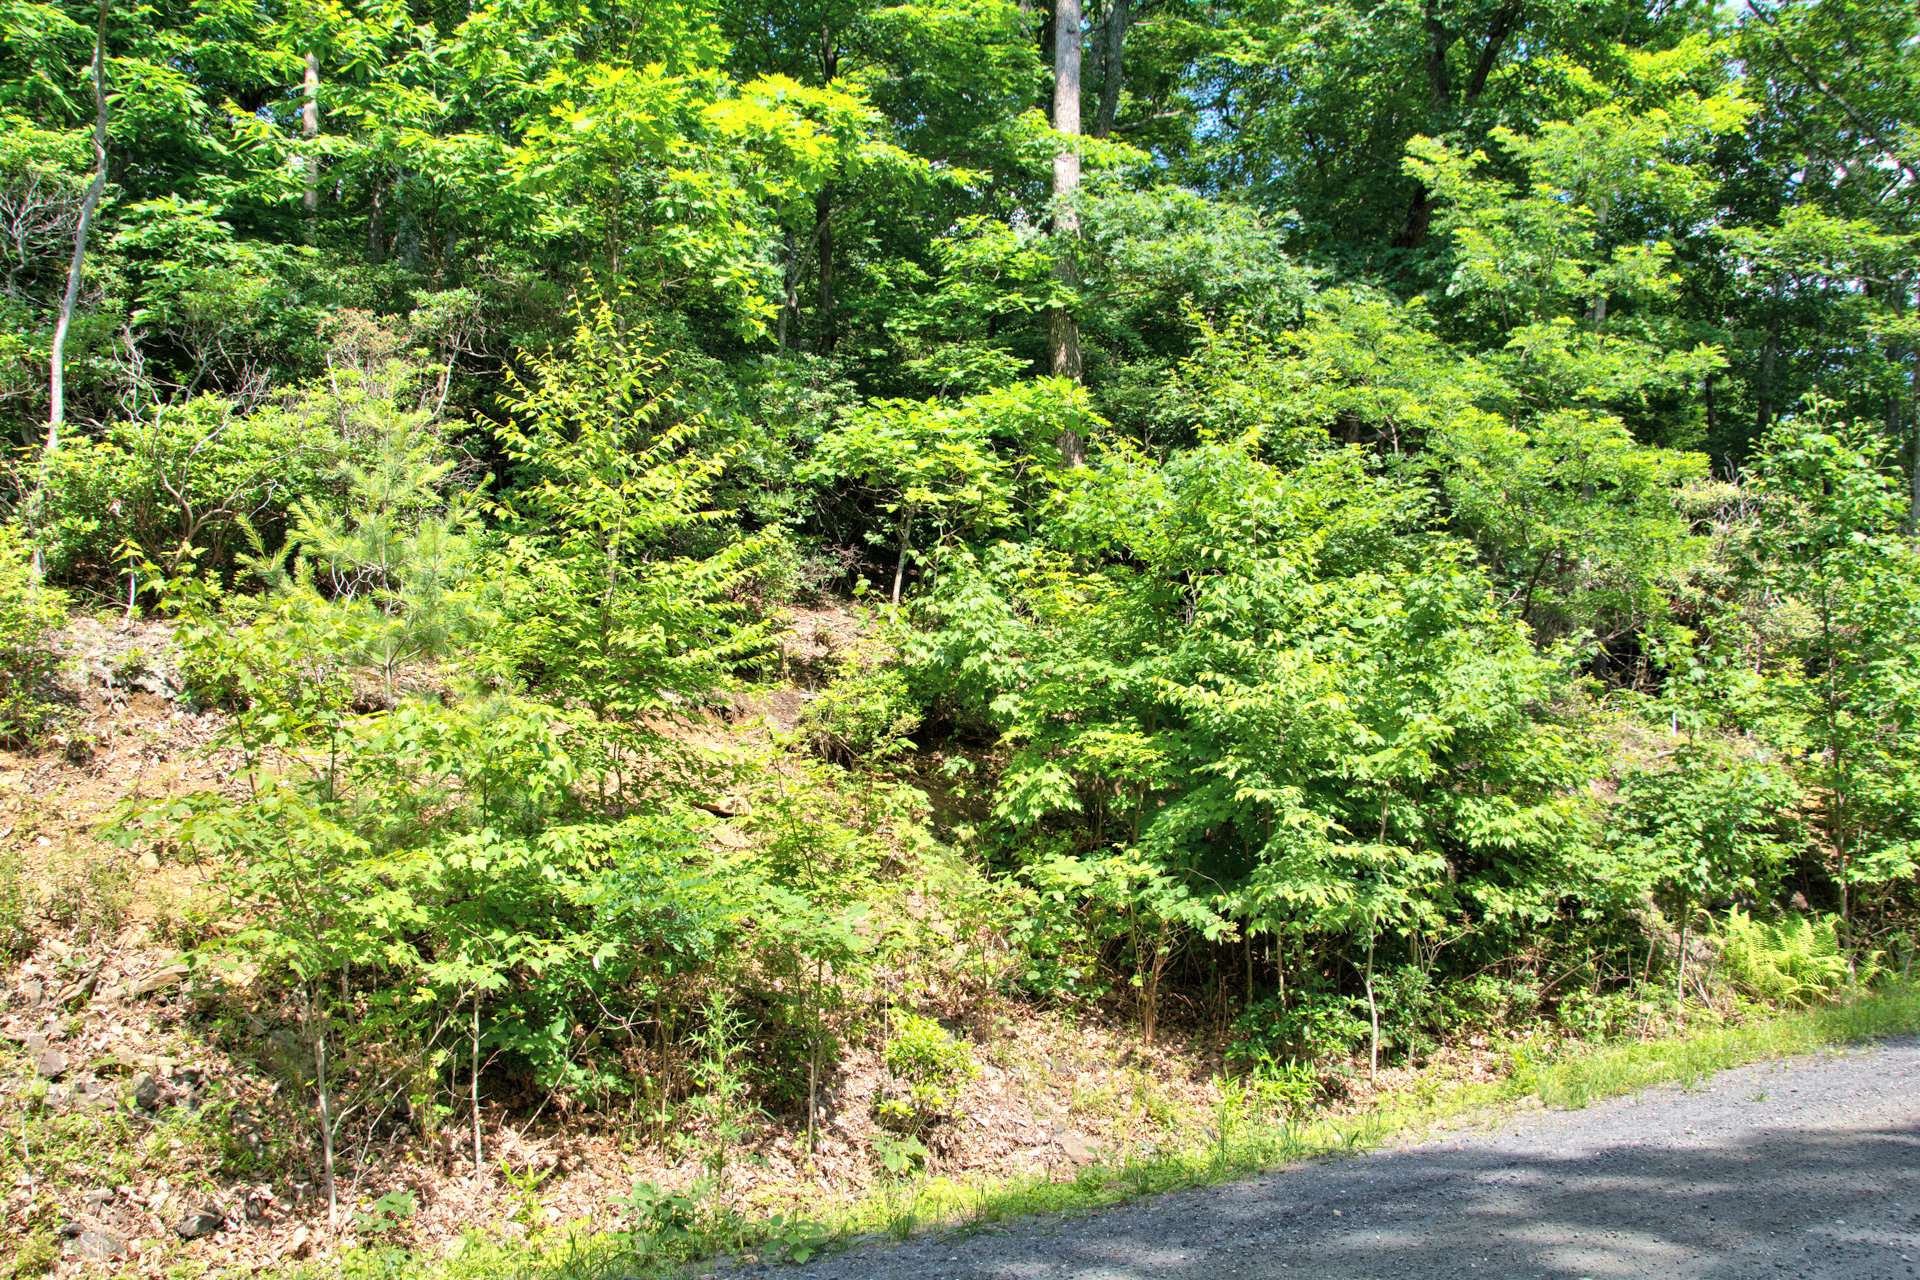 Lot 22, a 0.94 acre home site also has shared well rights and offered at $45,000.